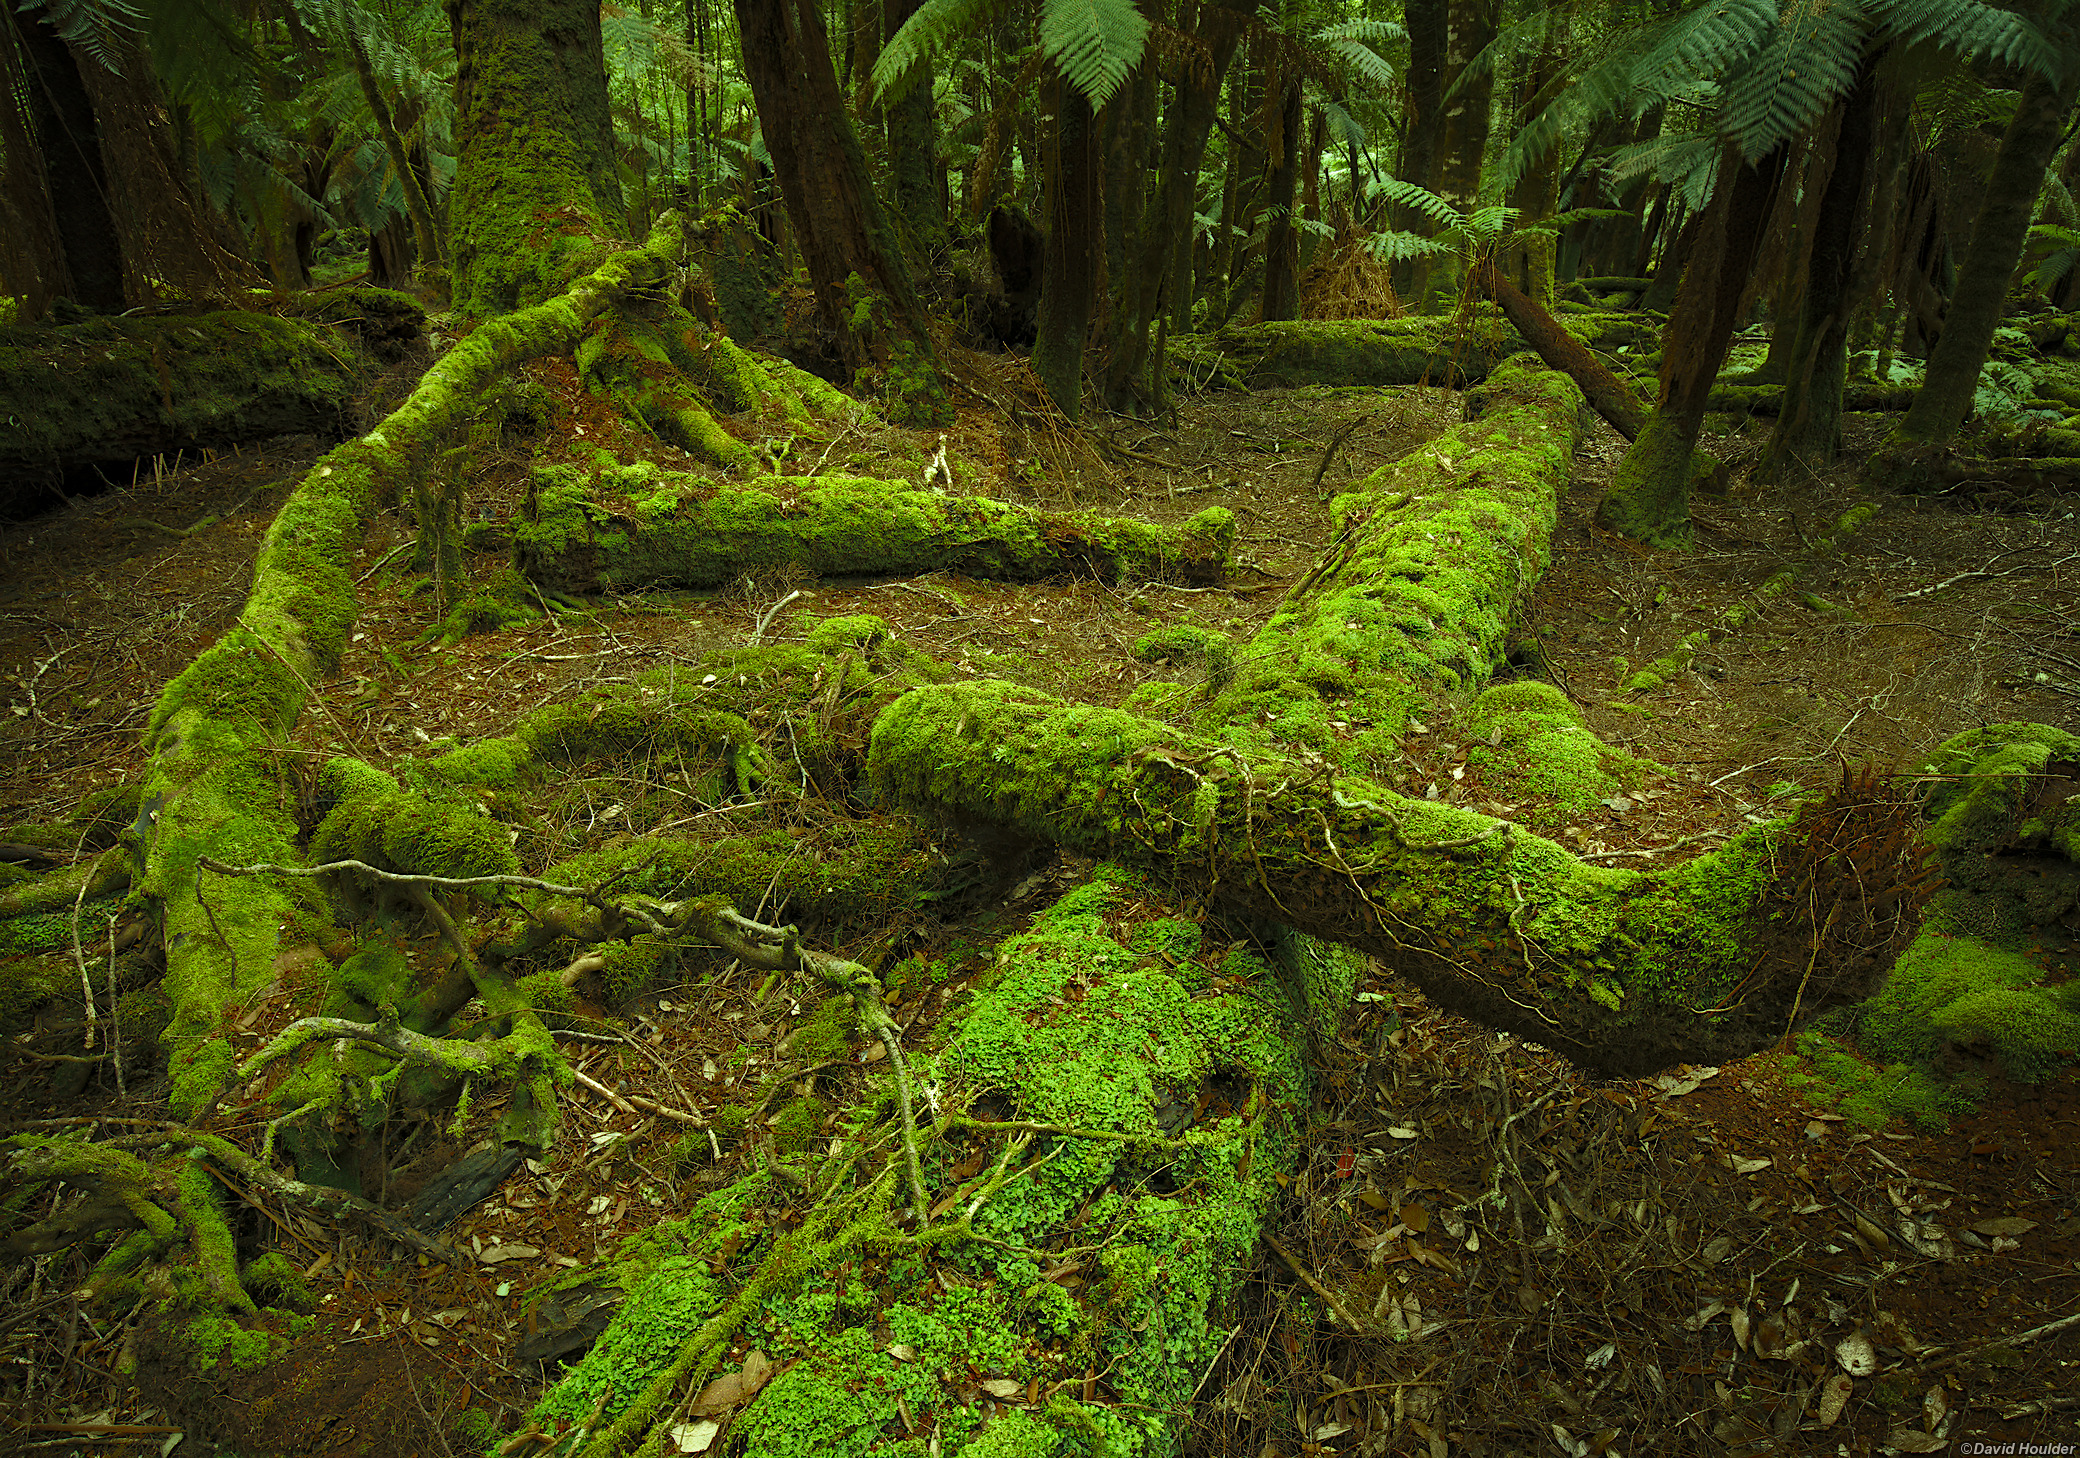 Moss-covered fallen timber in a temperate rainforest with tree ferns in the background